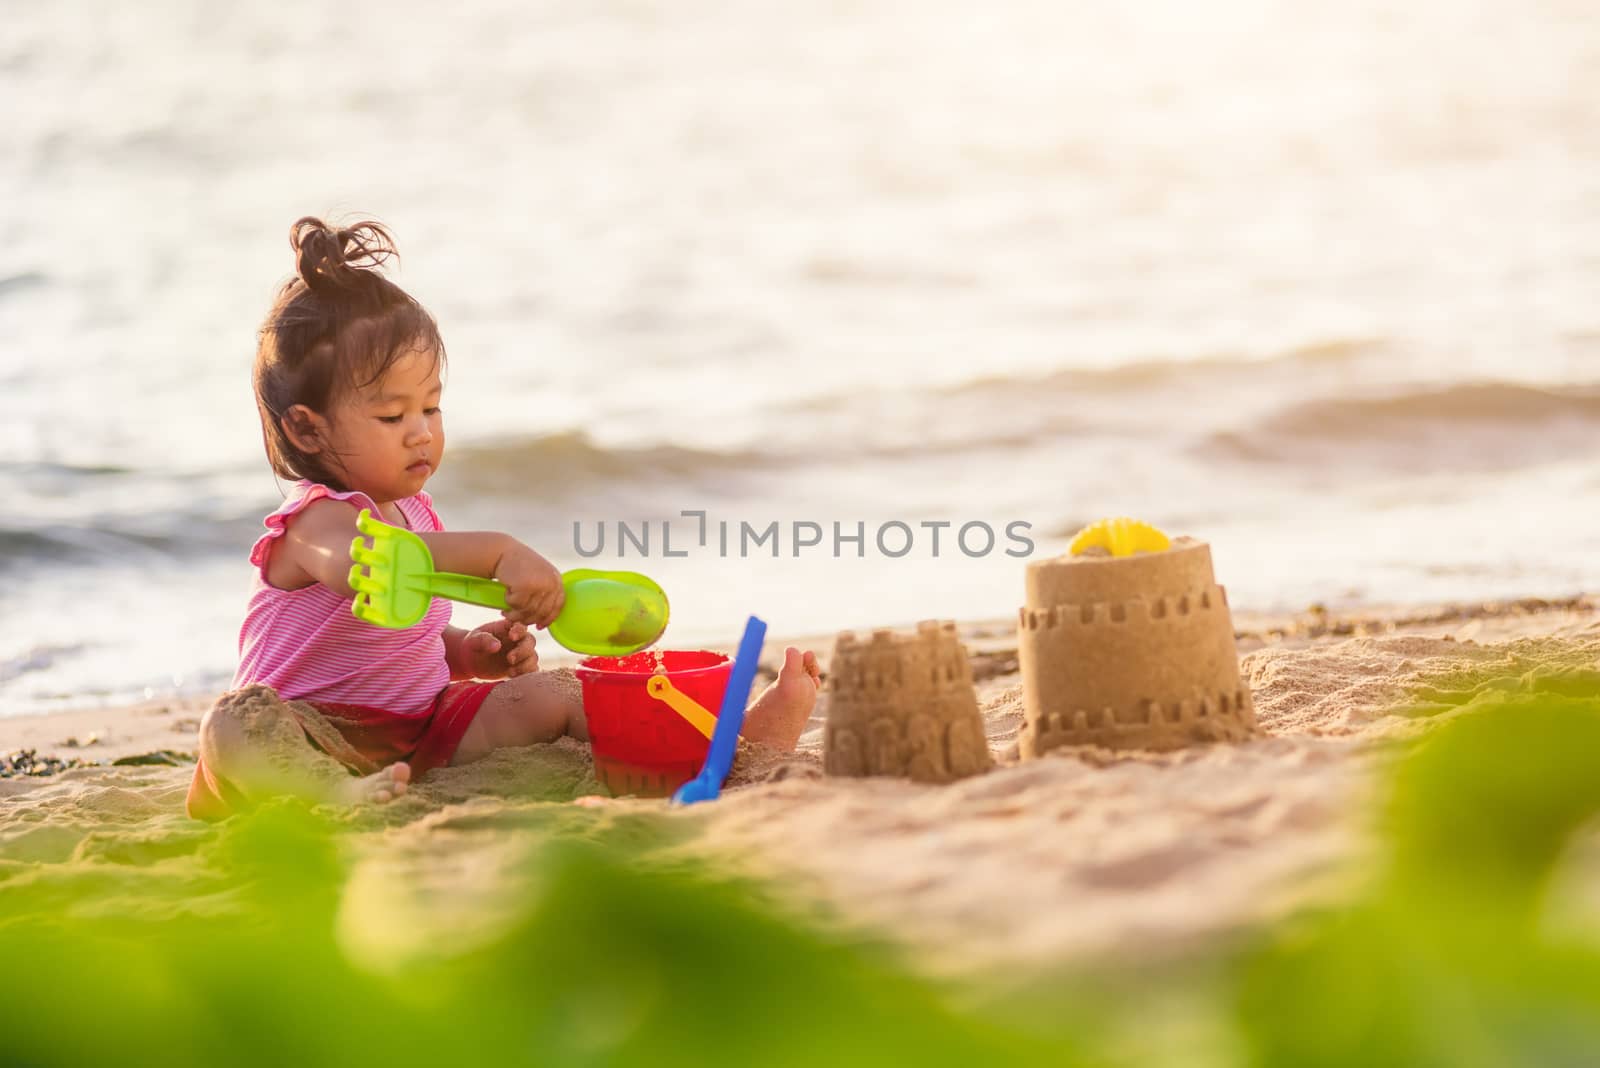 Happy fun Asian child cute little girl playing sand with toy sand tools at a tropical sea beach in holiday summer on sunset time, tourist trip concept